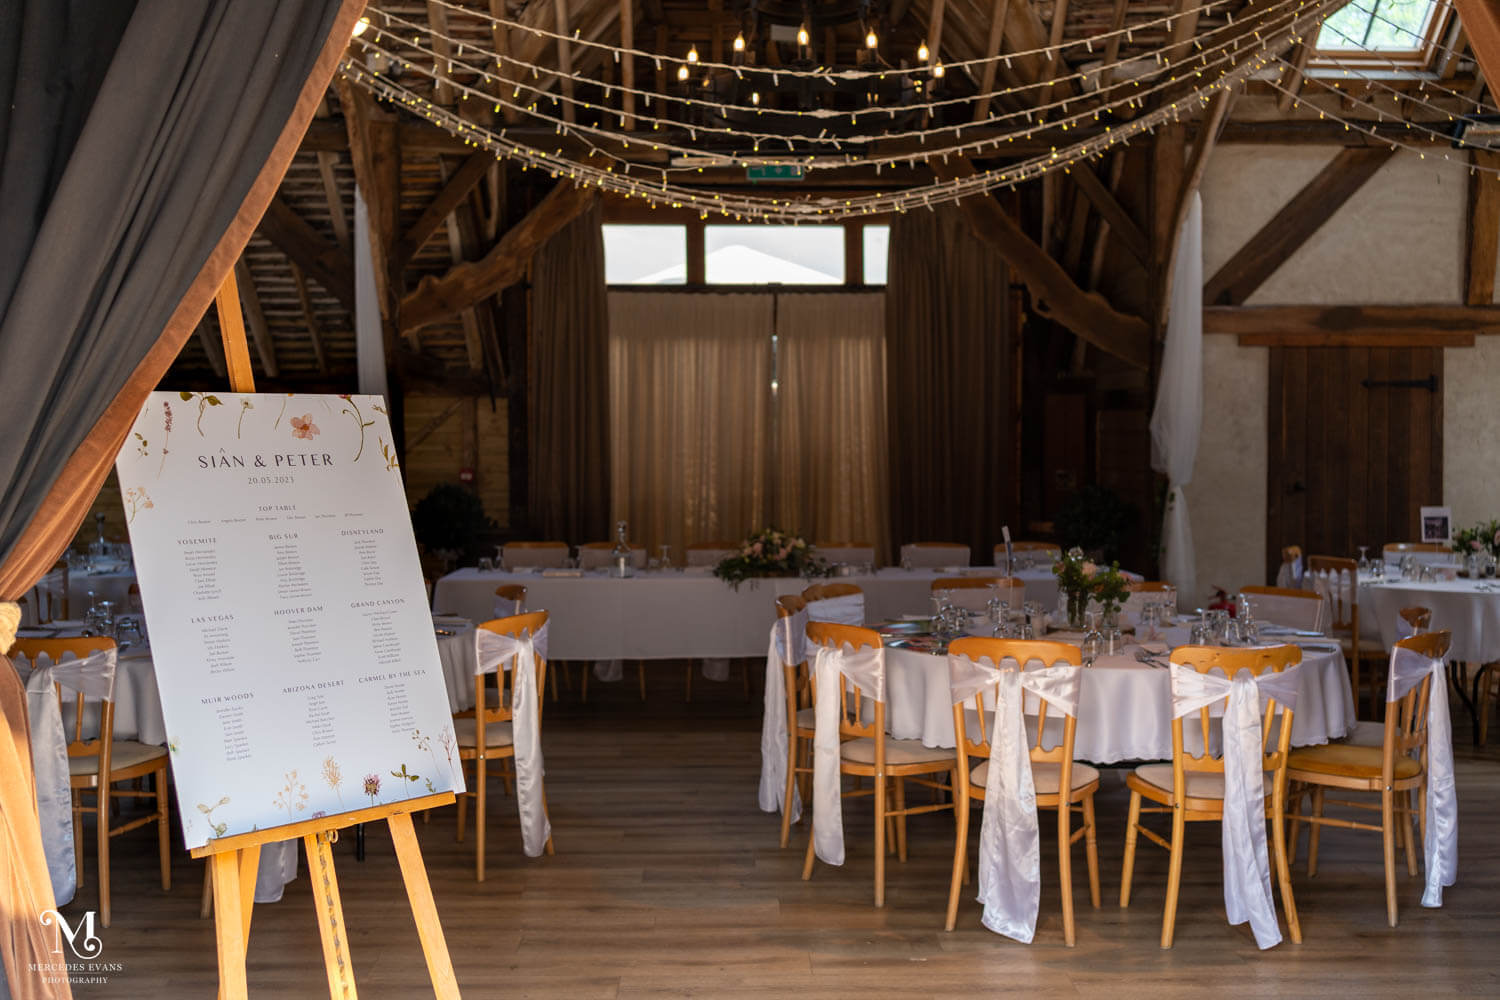 table seating plan stands by the barn doorway, with the tables set for the wedding breakfast behind